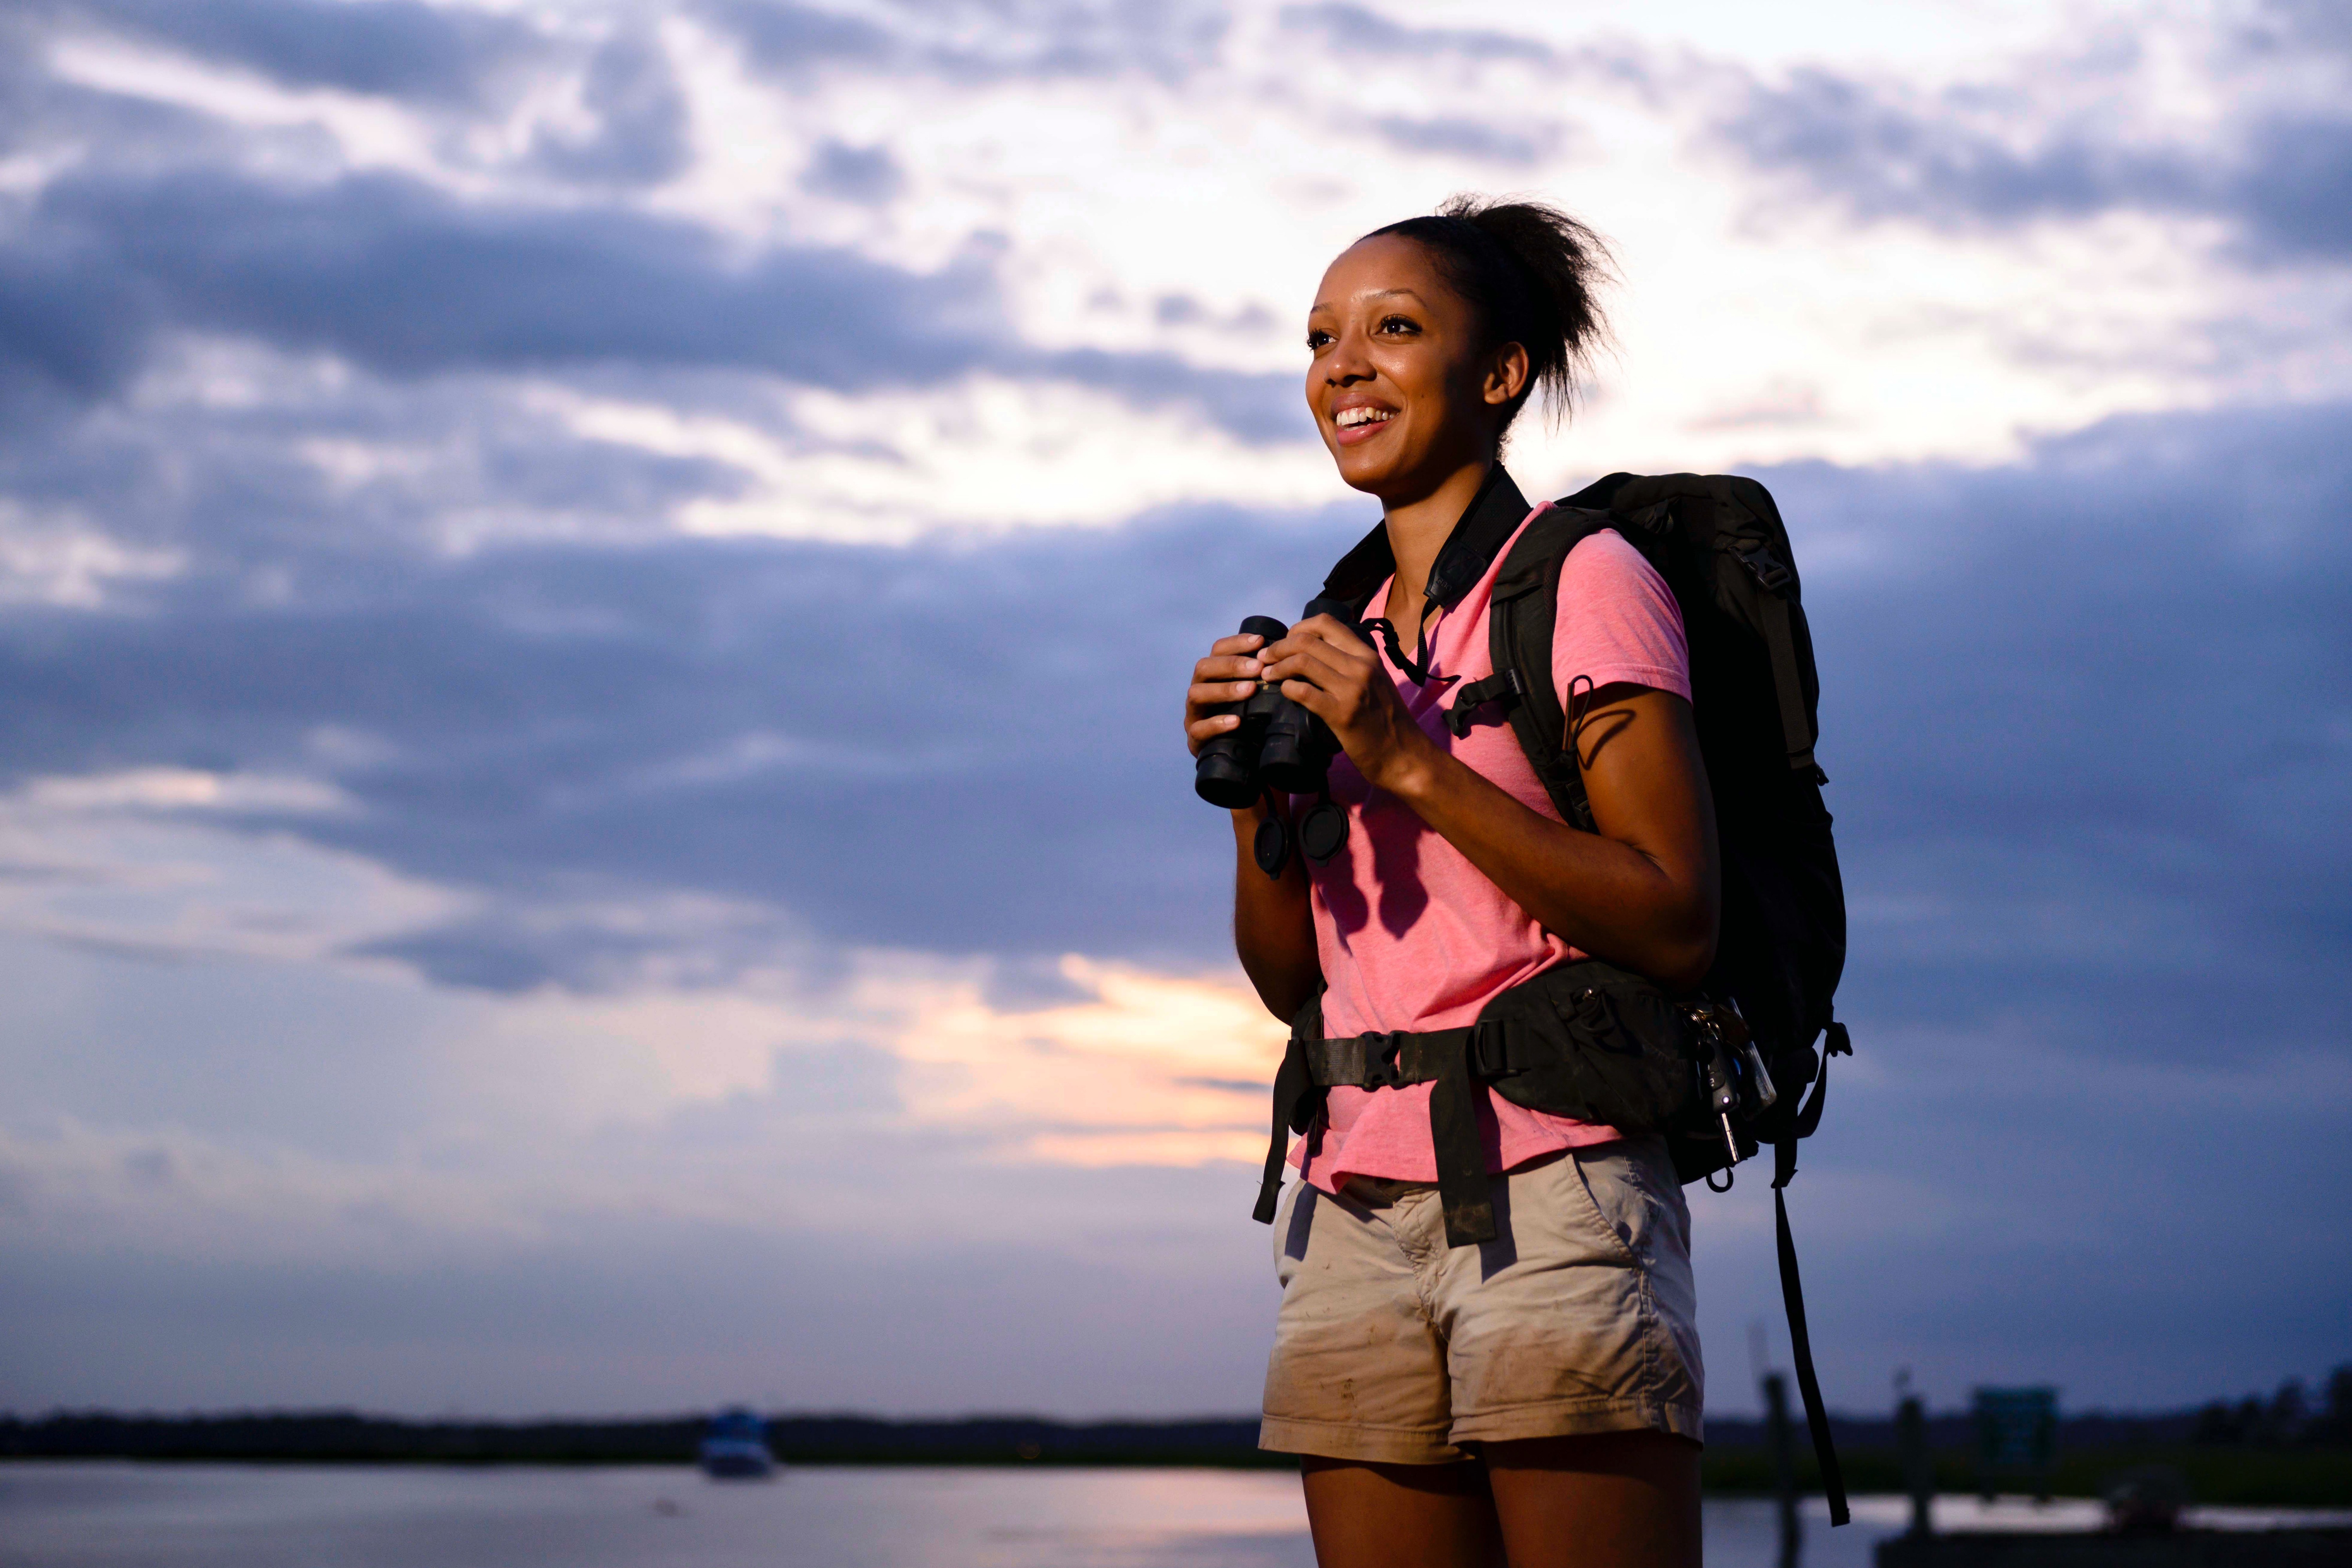 A young Black woman wearing a backpack and holding binoculars and smiling, looks off into the distance under a cloudy blue sky.